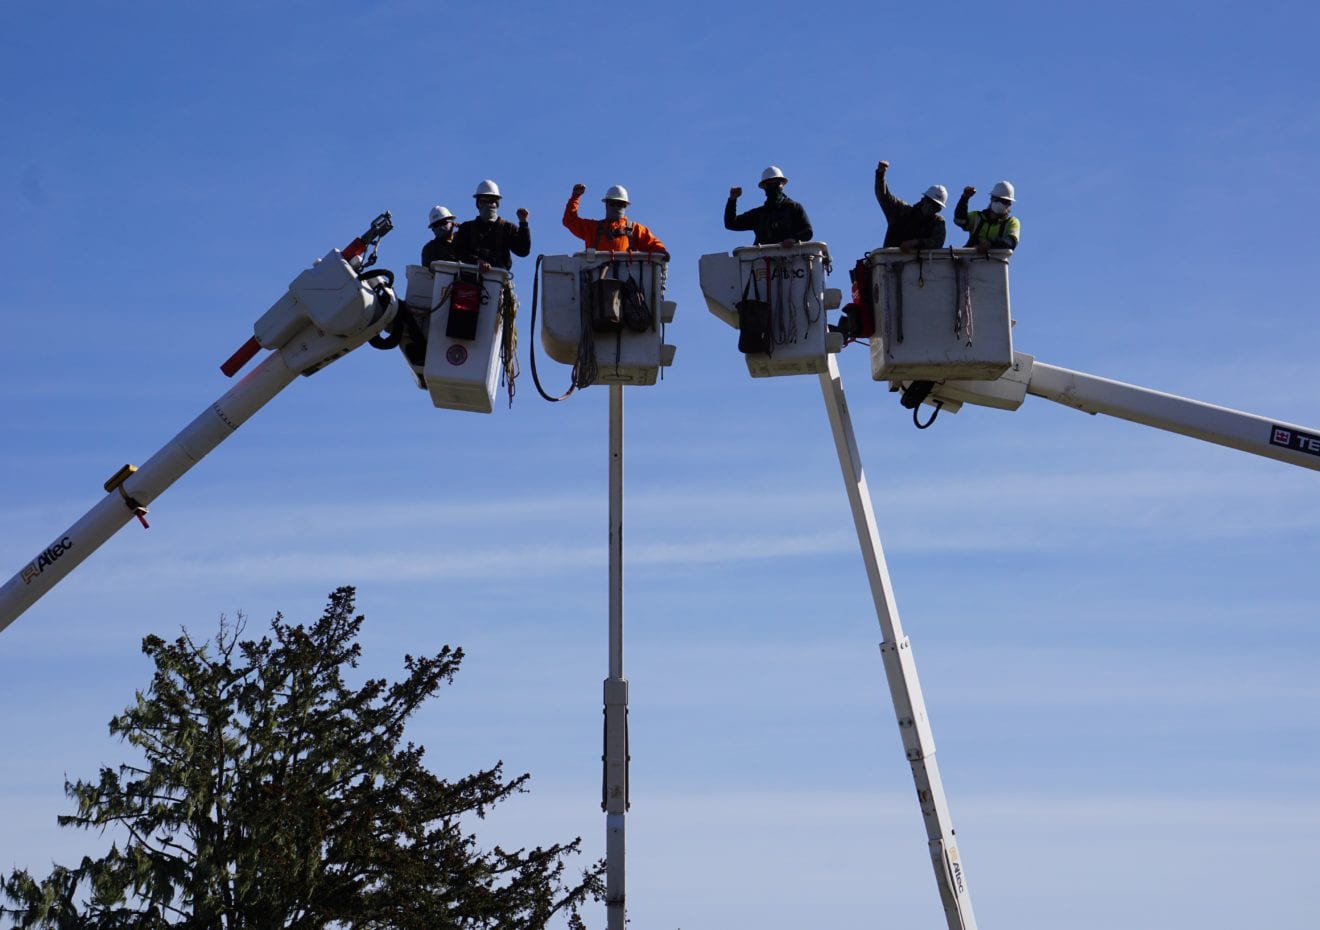 April 18th is National Lineworker Appreciation Day